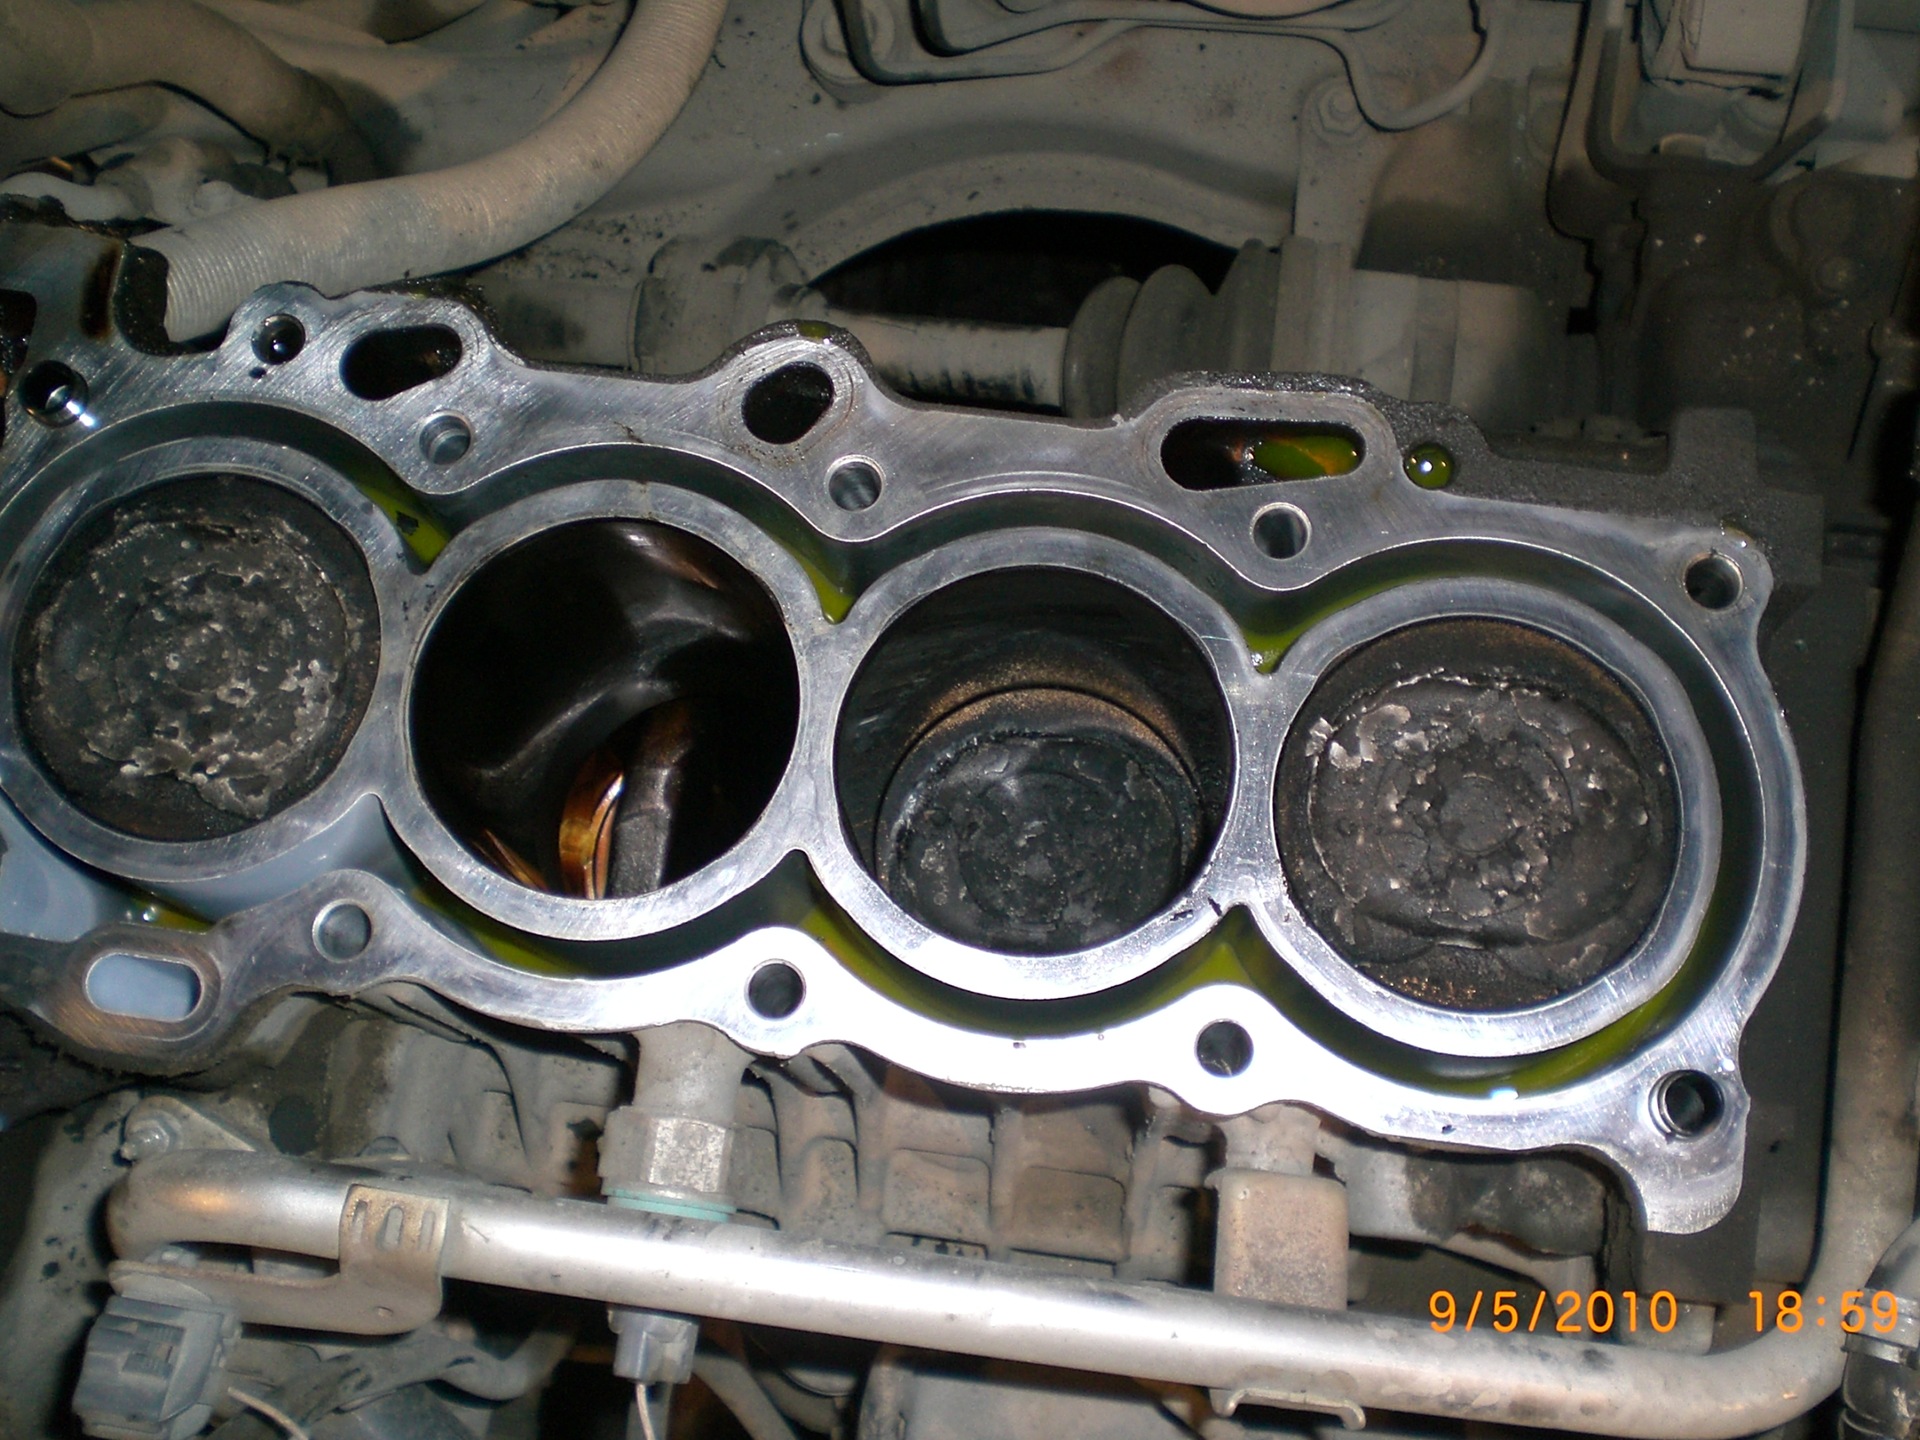 Engine repair replacement of oil seals and rings - Toyota Will VS 18 L 2010